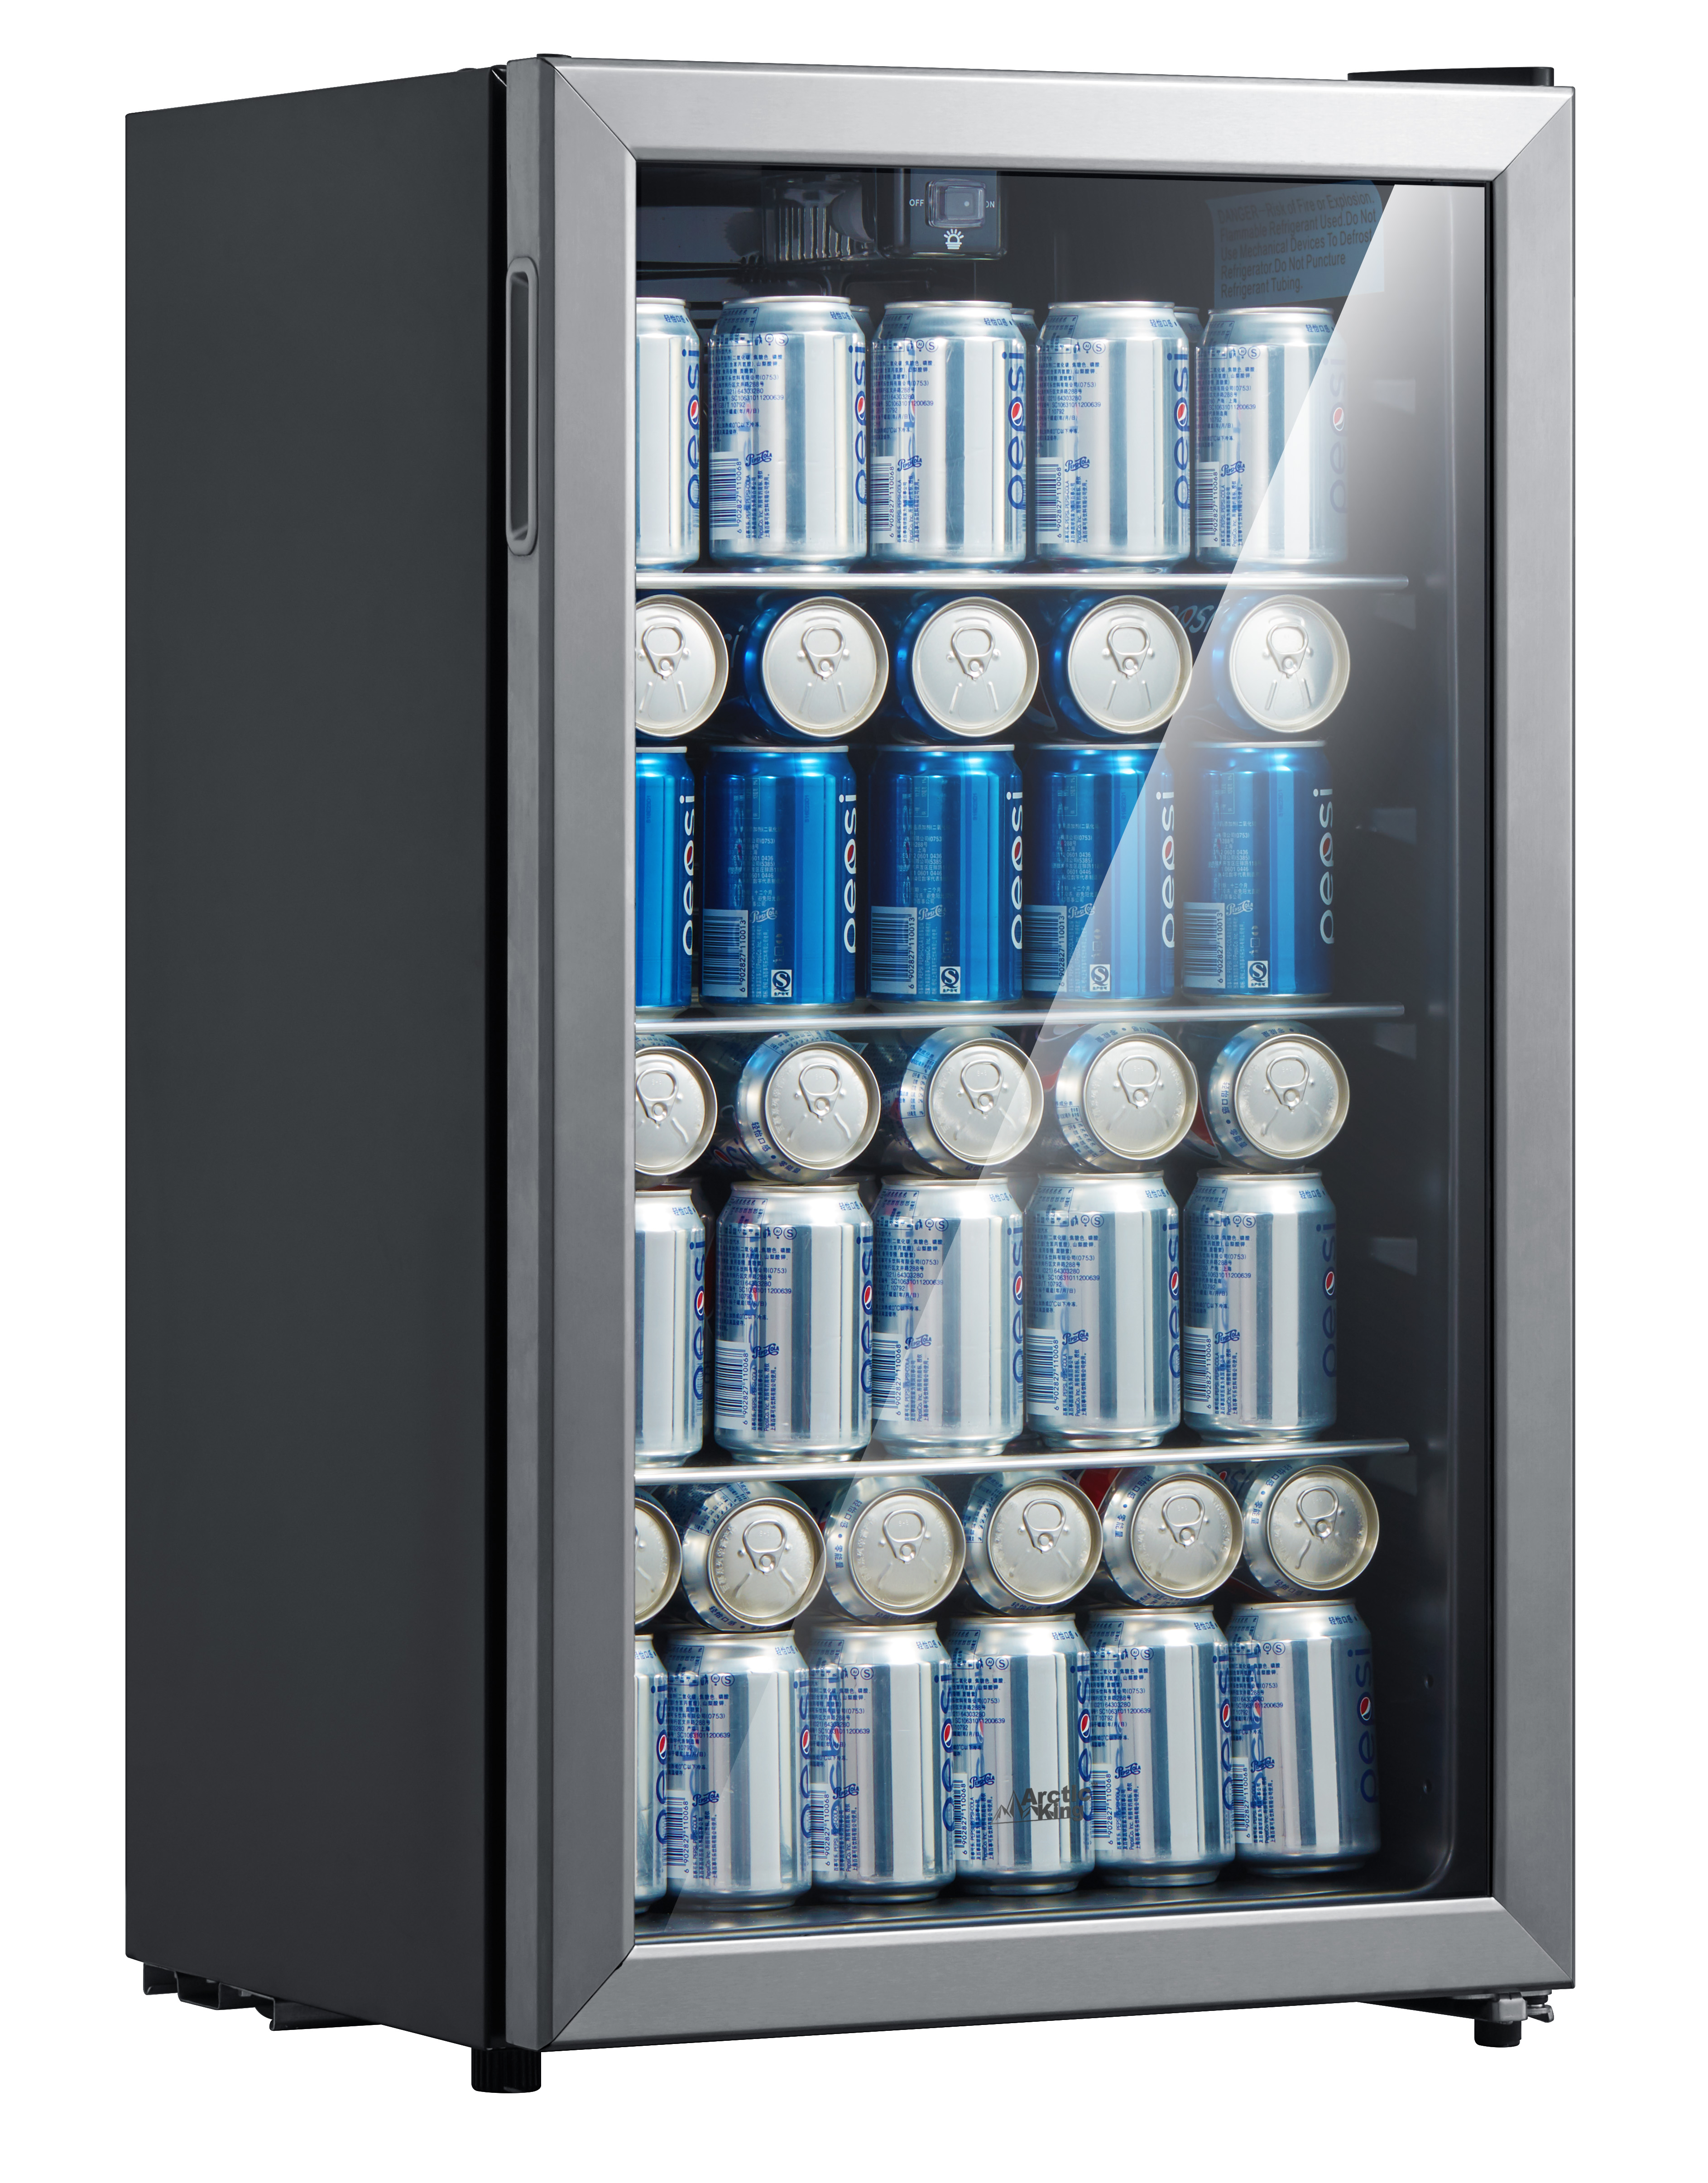 Arctic King 115 Can Beverage Fridge, Stainless Steel look Frame - image 4 of 9